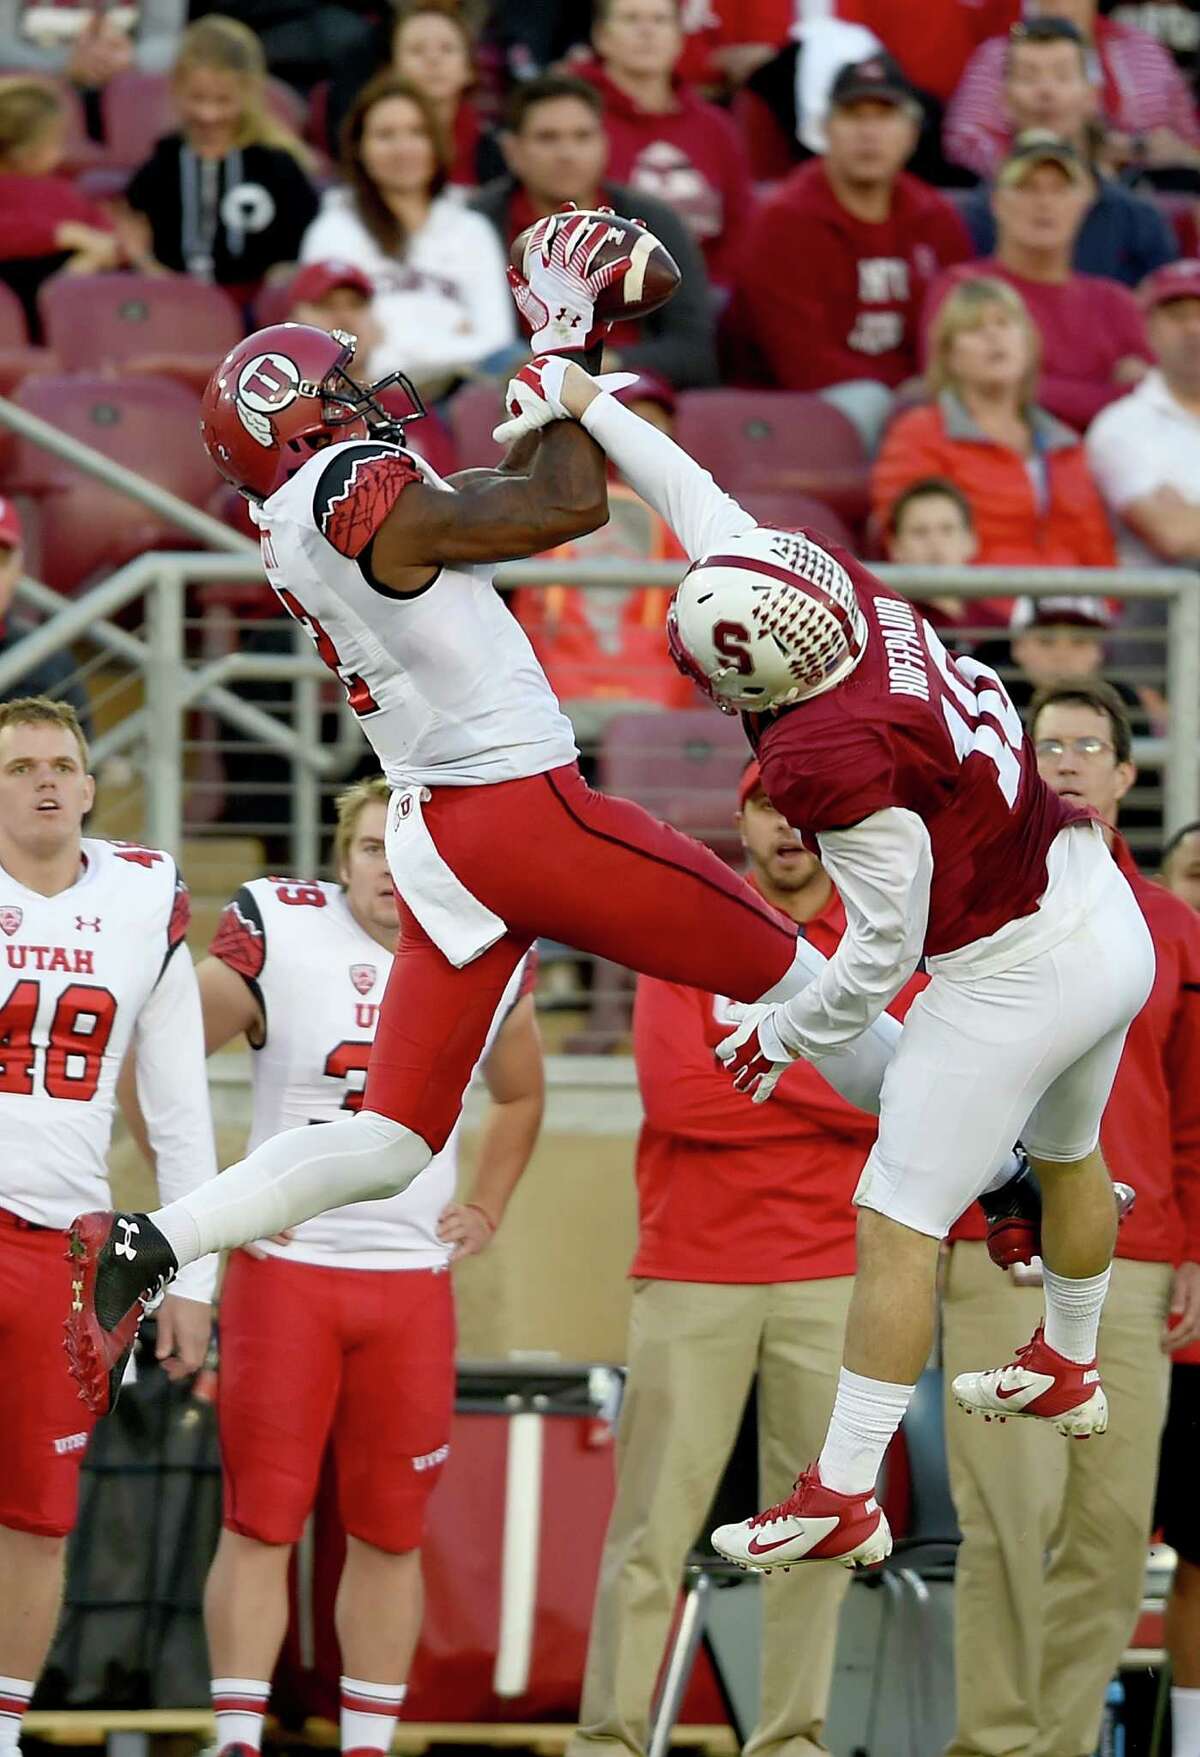 PALO ALTO, CA - NOVEMBER 15: Kenneth Scott #2 of the Utah Utes catches a 32 yard pass over Zach Hoffpauir #10 of the Stanford Cardinal in the second quarter at Stanford Stadium on November 15, 2014 in Palo Alto, California. (Photo by Thearon W. Henderson/Getty Images)